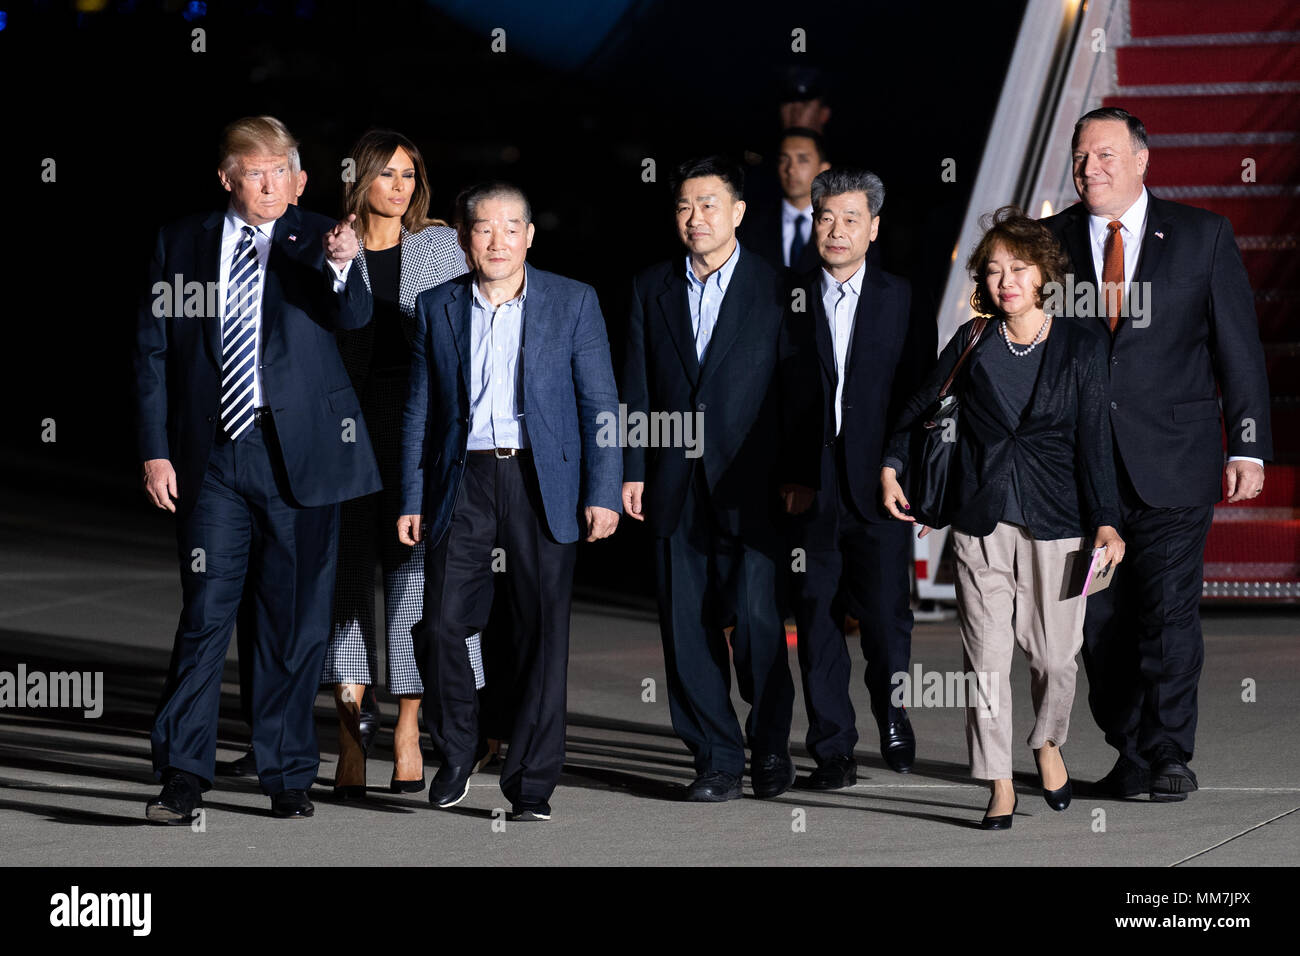 President Donald Trump and his wife Melania leaving the plane with the three American detainees (Kim Dong-chul, Kim Hak-song, and Tony Kim) held in captivity in North Korea along with Secretary of State Mike Pompeo, at Joint Base Andrews in Suitland. Stock Photo